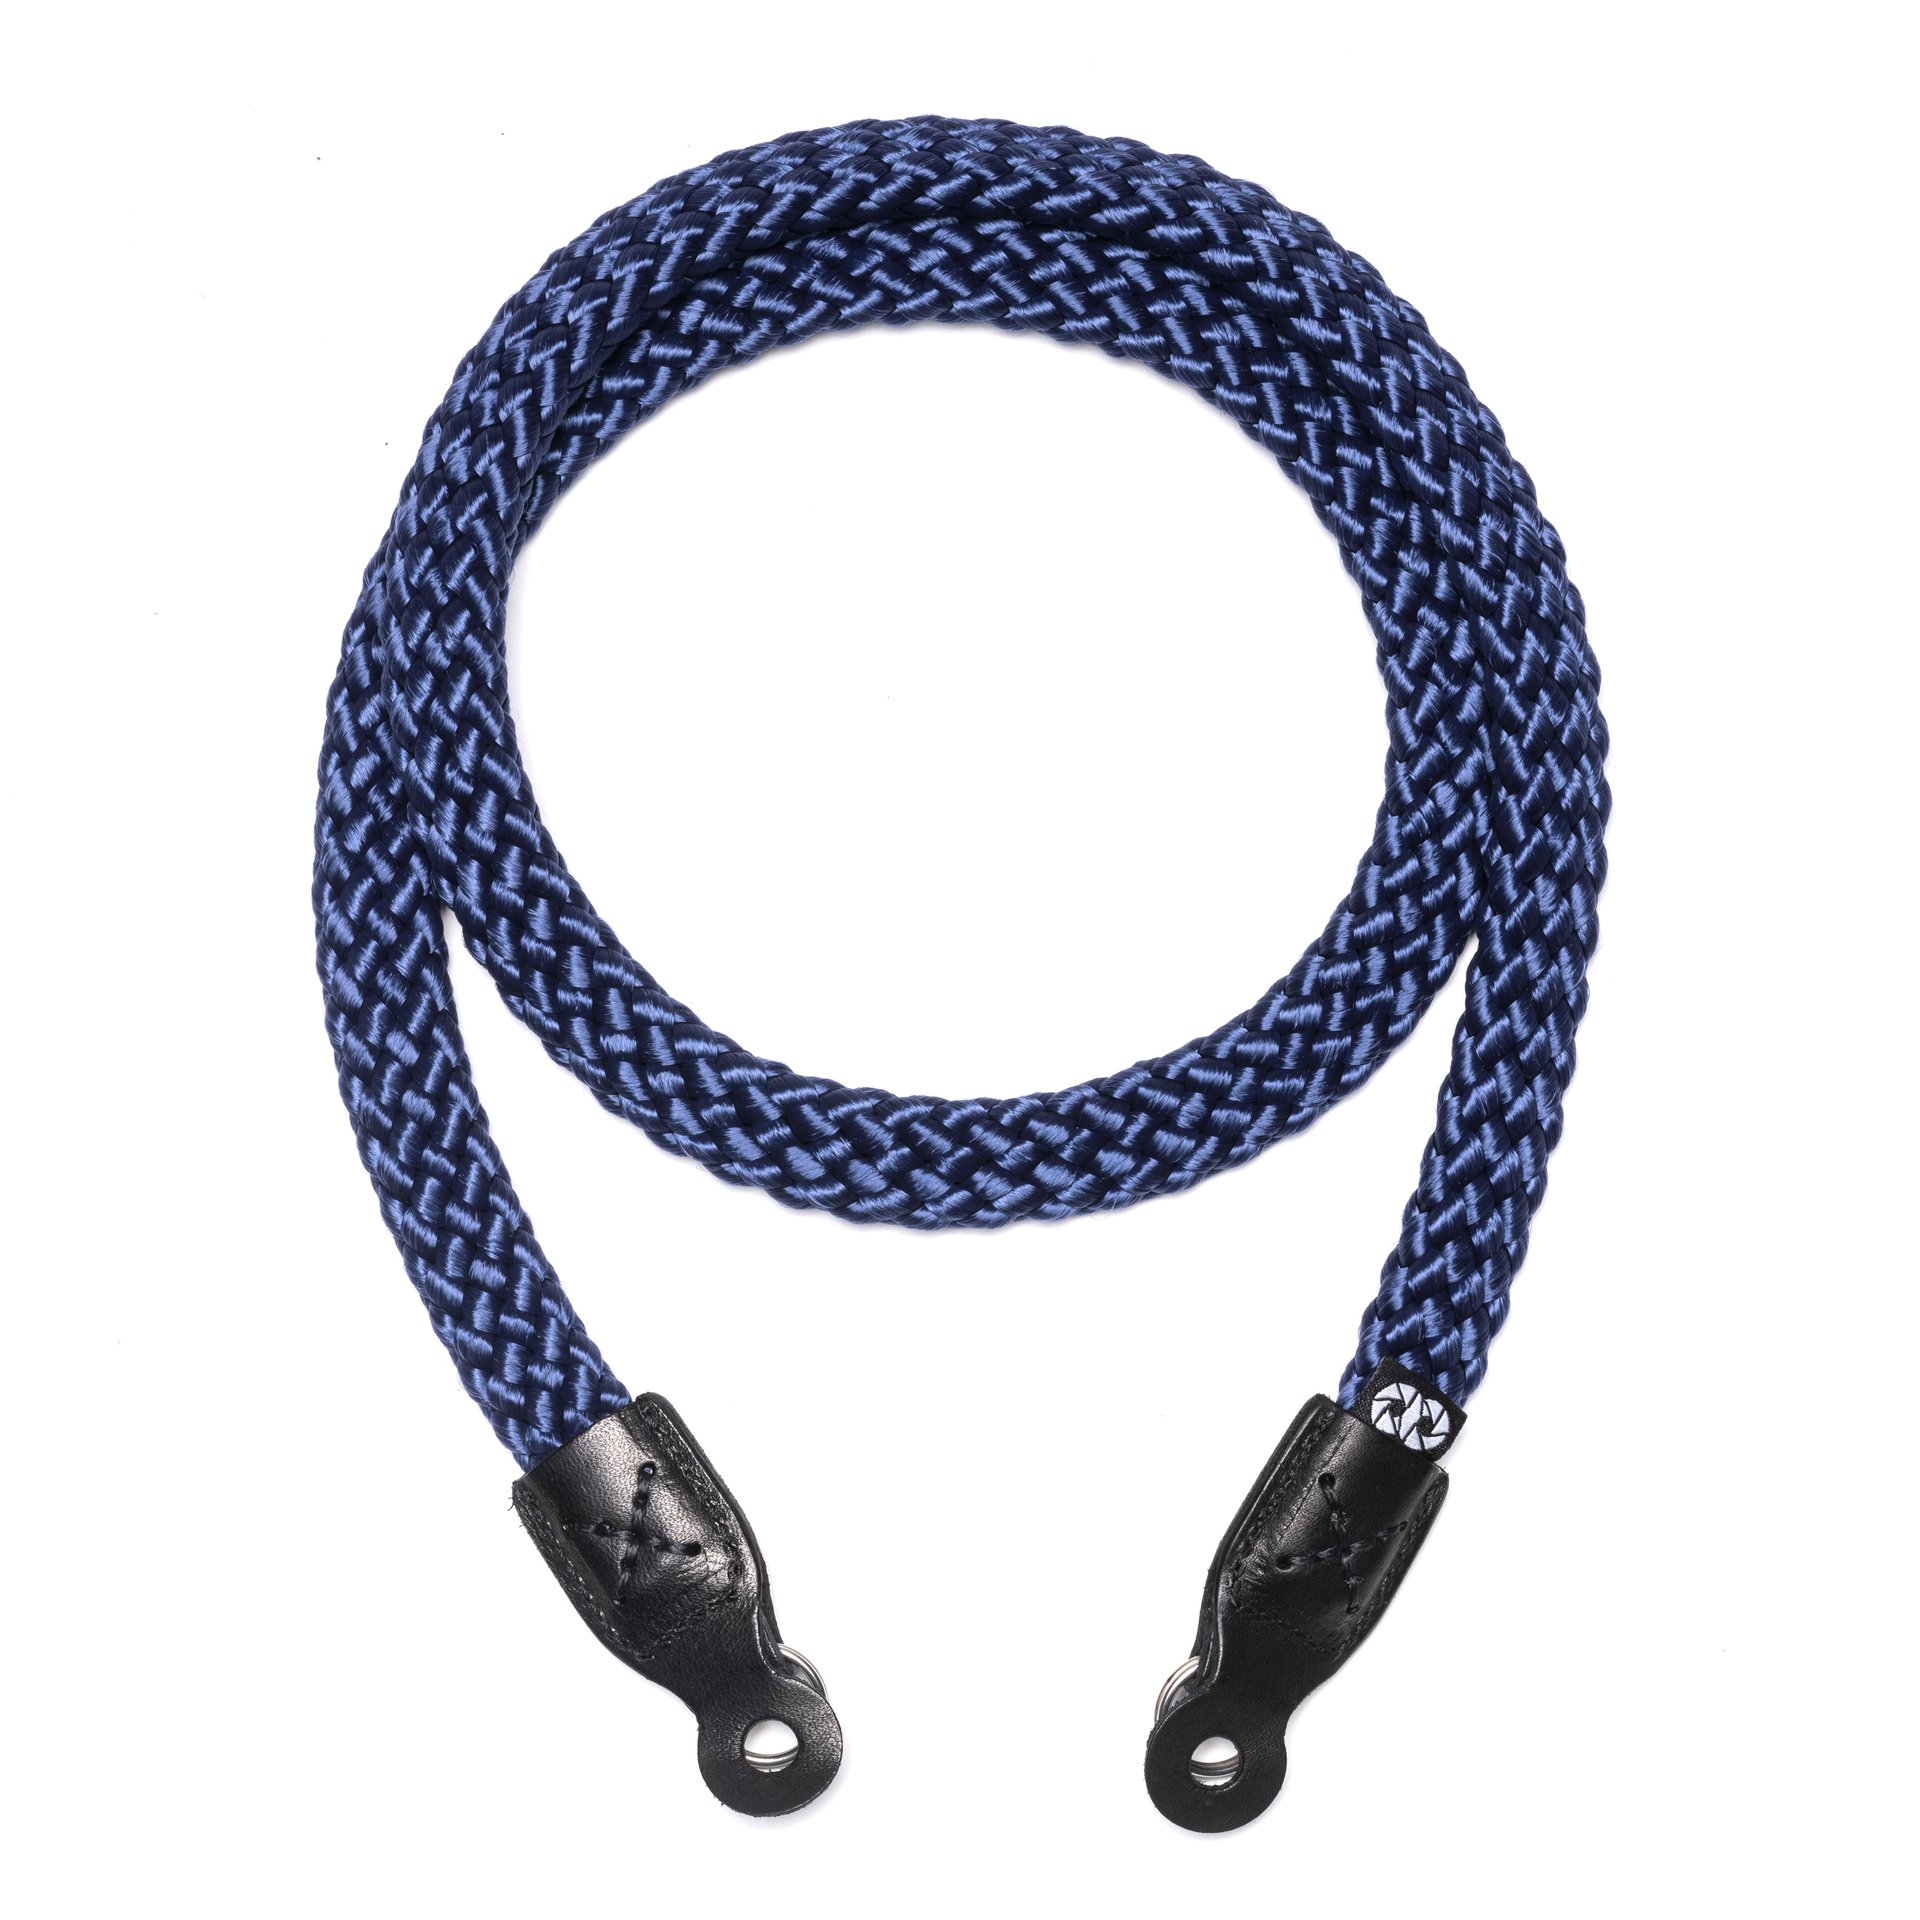 TThumbnail image for COOPH BRAID CAMERA STRAP - NAVY